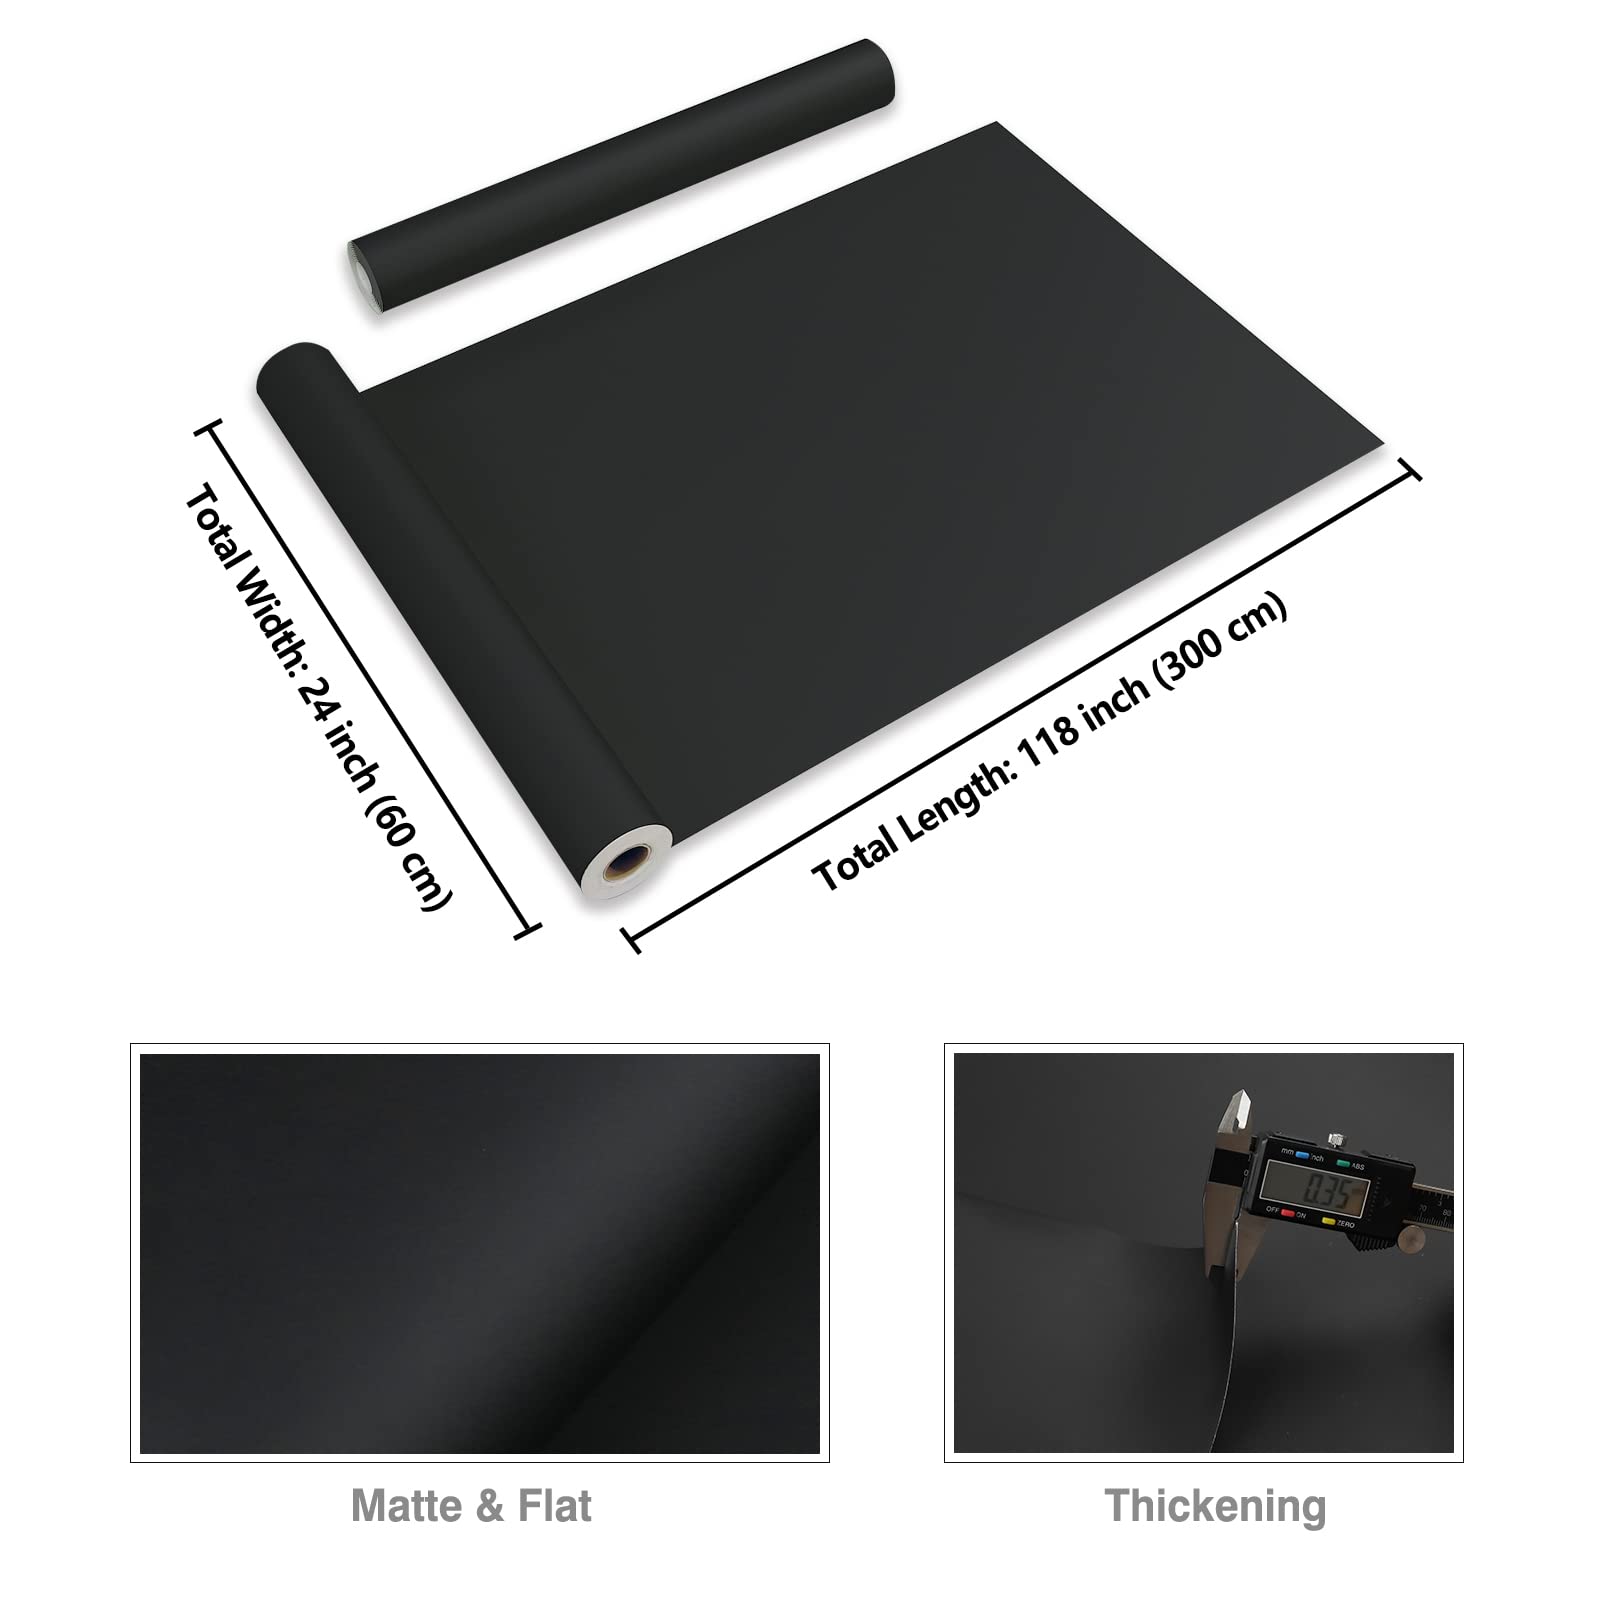 CRE8TIVE Black Wallpaper Peel and Stick Modern 24"x118" Wide Self Adhesive Matte Black Contact Paper for Countertops Waterproof Decorative Thick Black Vinyl Roll for Kitchen Bedroom Walls Cabinets